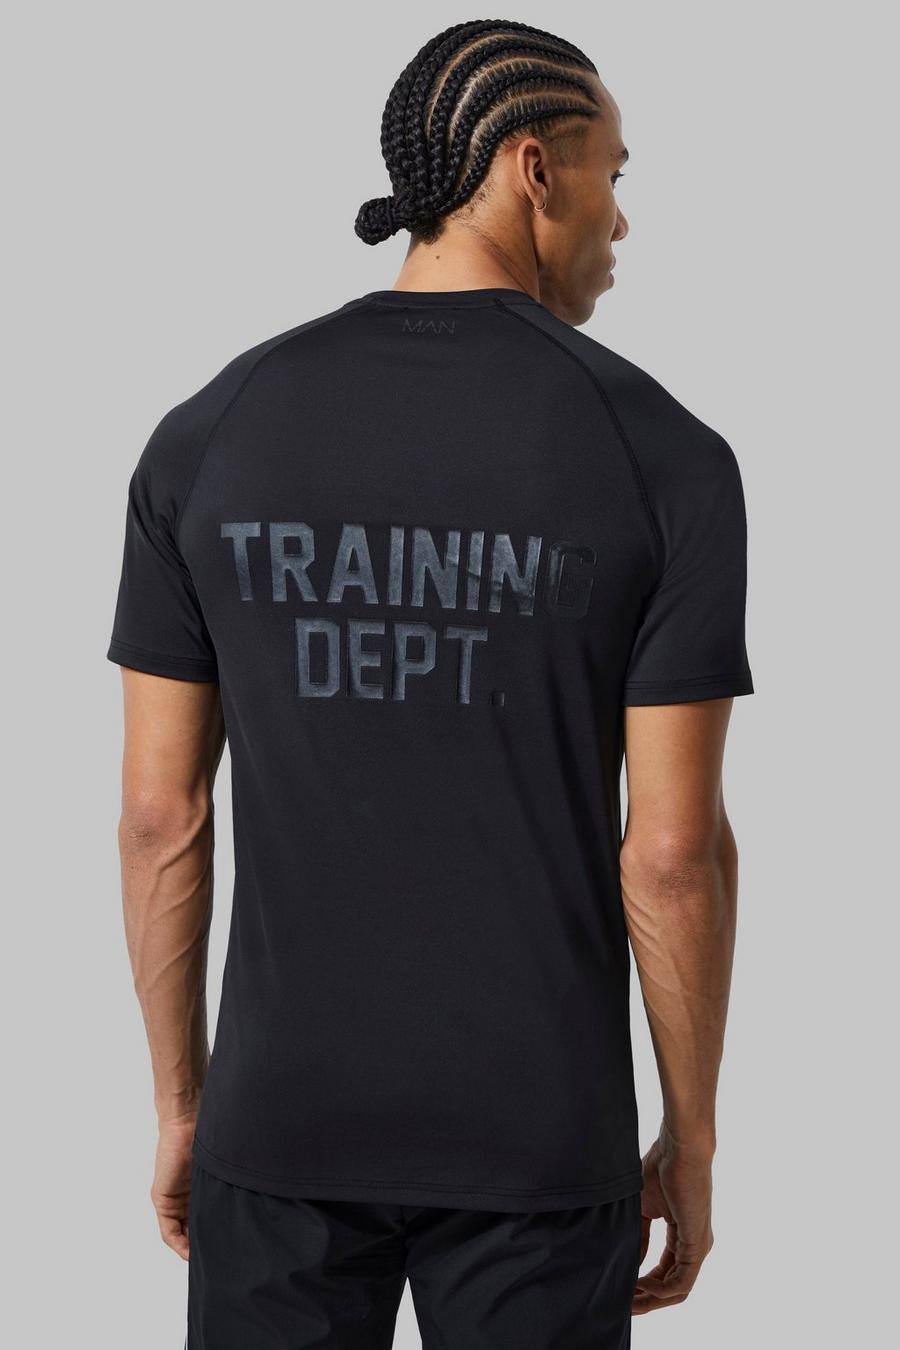 Tall Muscle-Fit Trainings Dept Muscle-Fit T-Shirt, Black